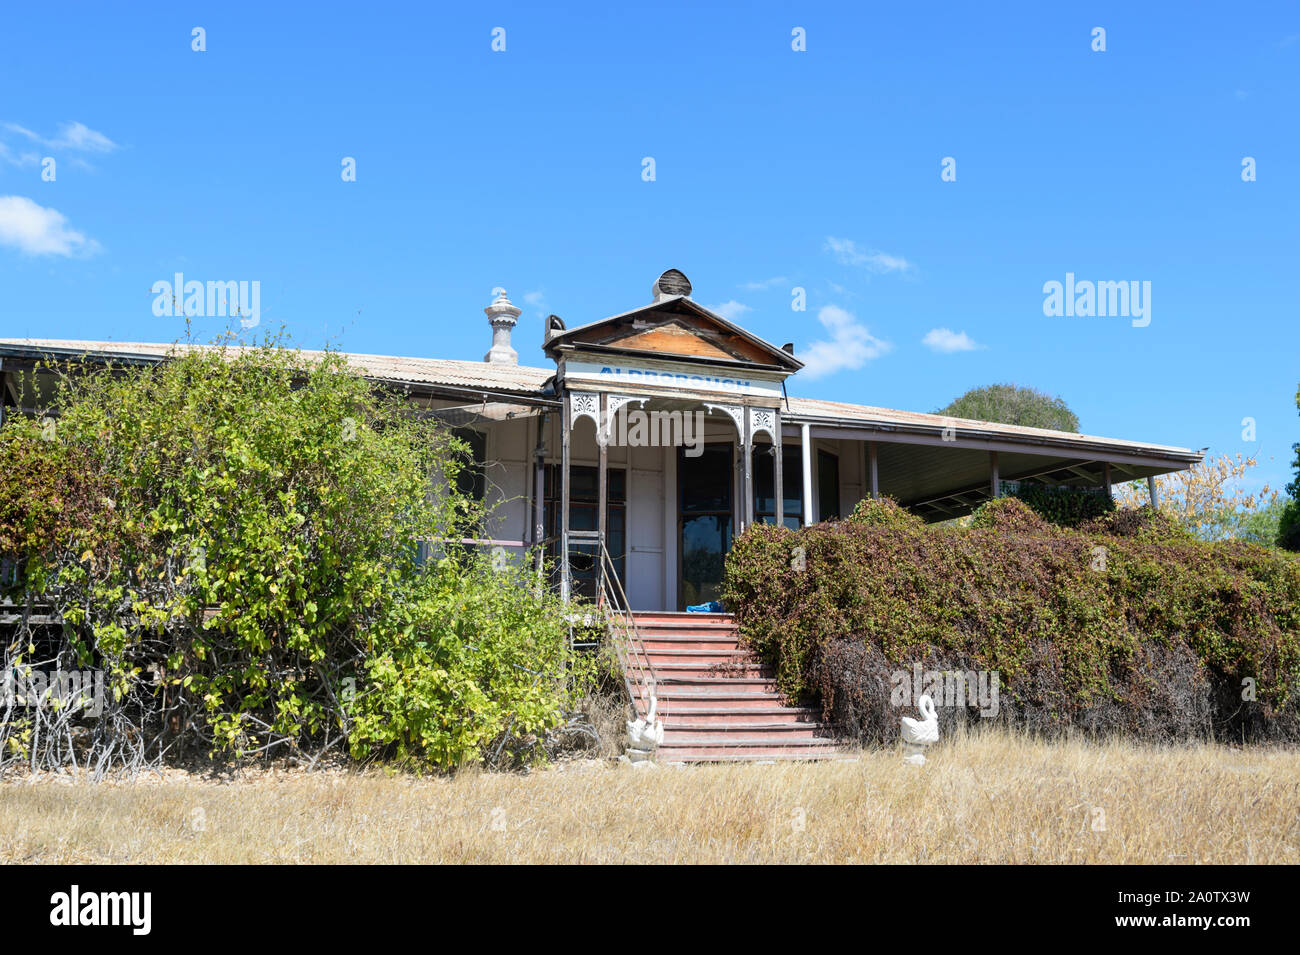 Abandoned old historic Aldborough House building, Charters Towers, Queensland, QLD, Australia Stock Photo